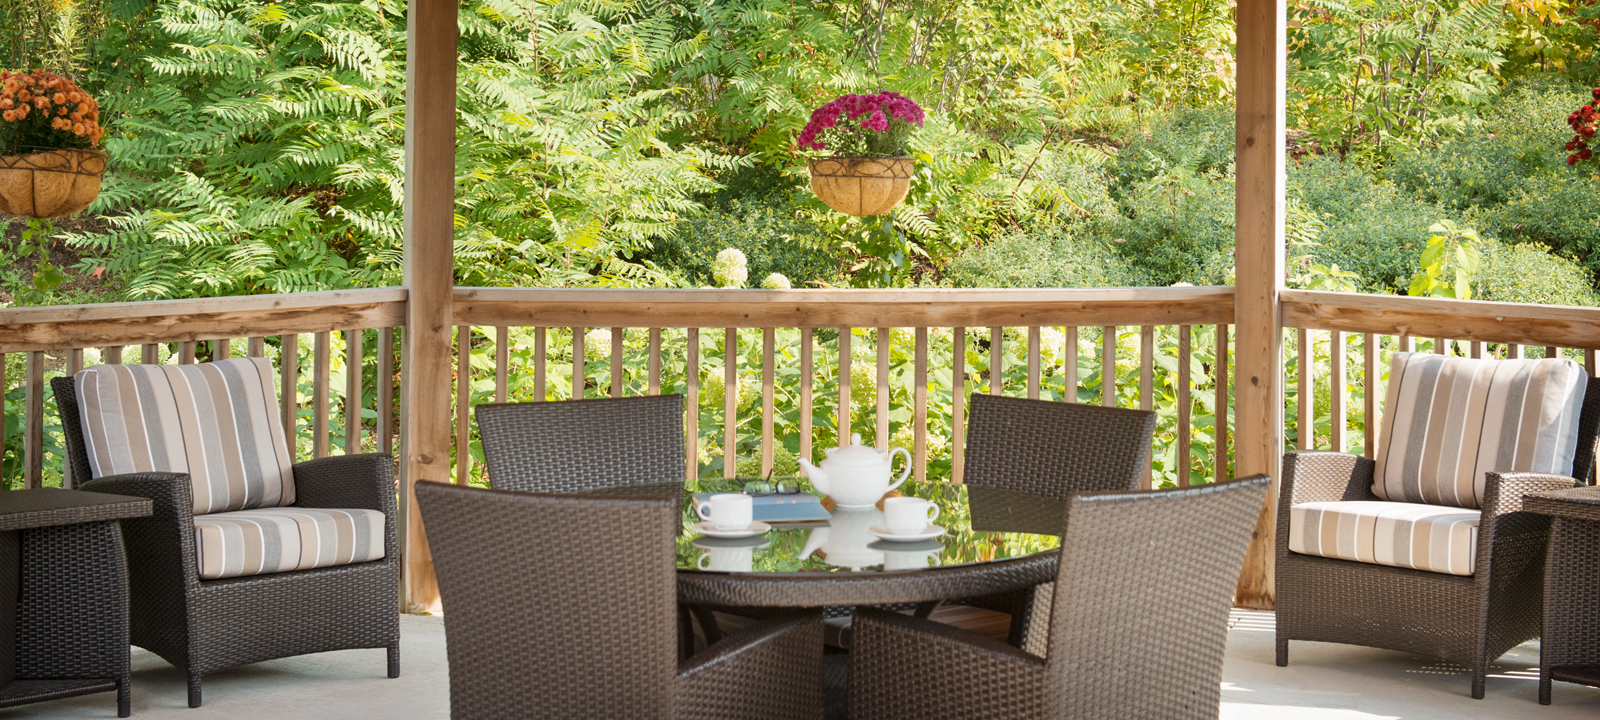 Outdoor terrace patio at Amica Little Lake senior living residence.